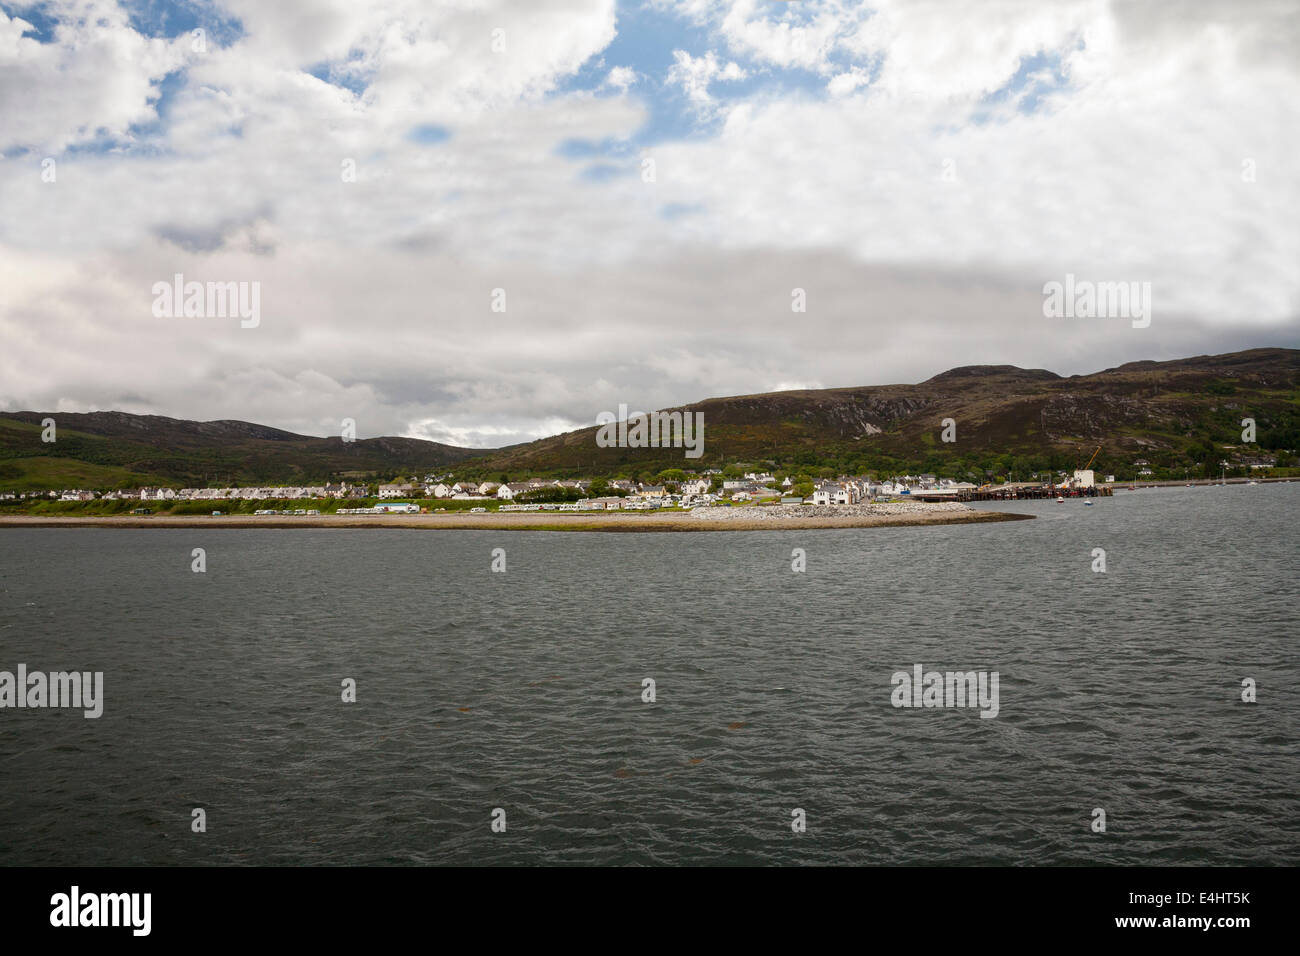 Approaching Ullapool ferry terminal on a Calmac ferry Stock Photo